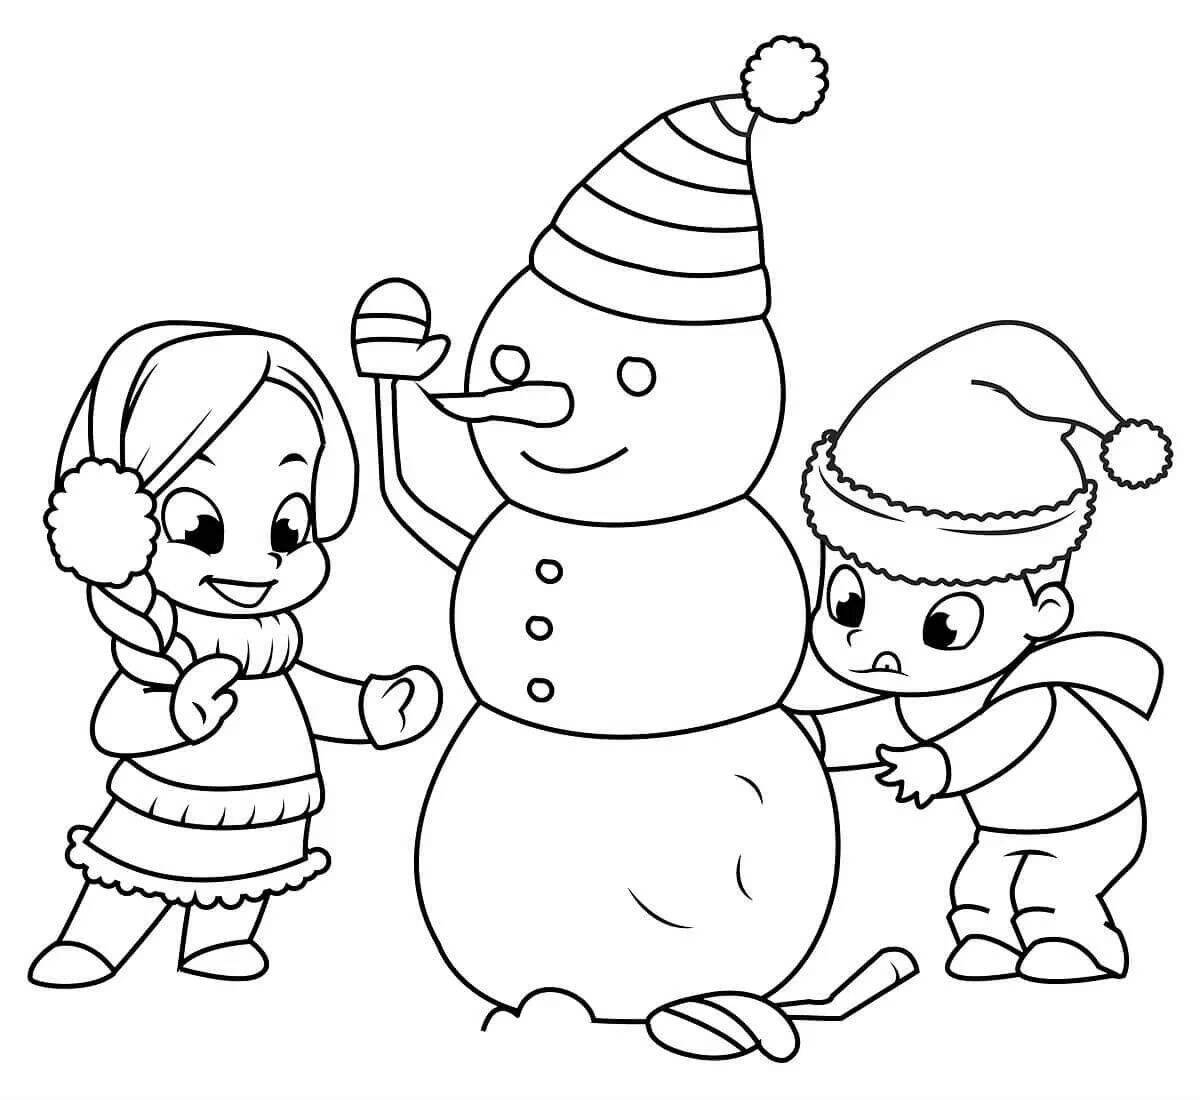 A fascinating children's coloring book snowman